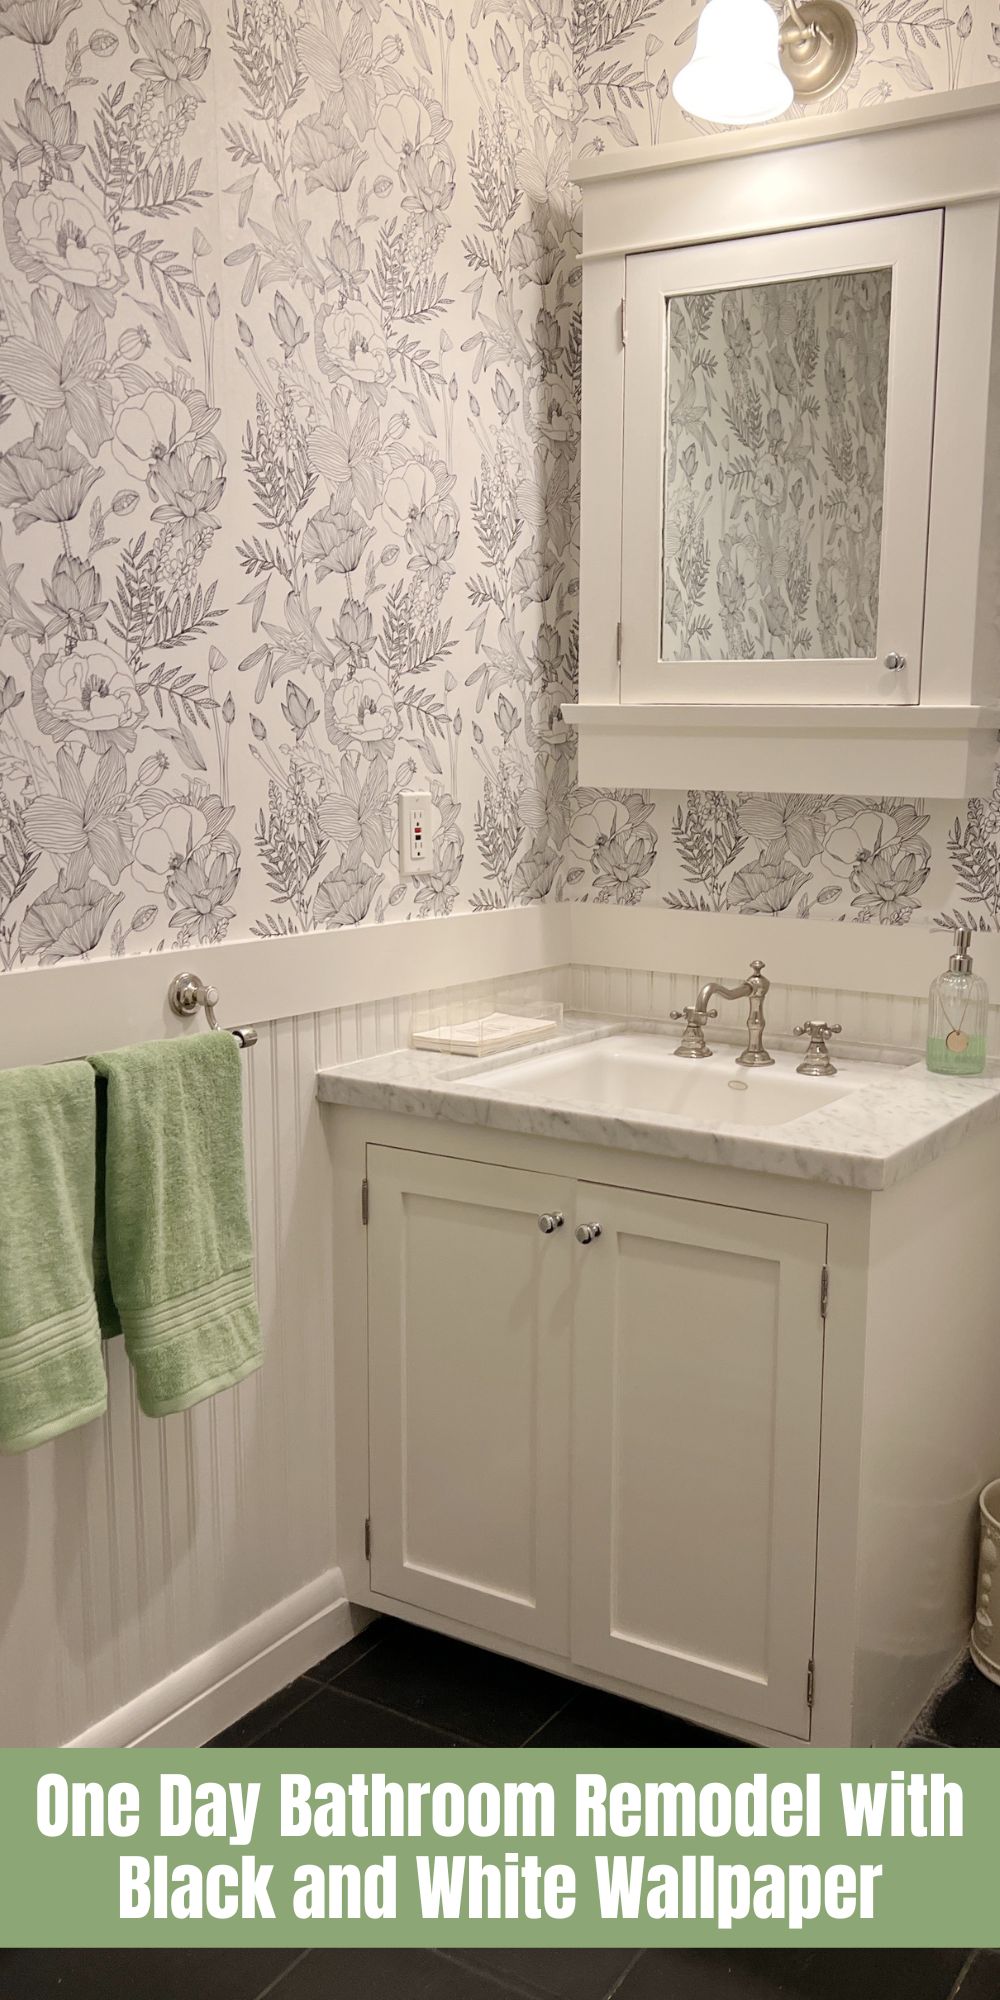 I did a quick remodel before the Launch Party and pulled off a one-day bathroom remodel with black and white wallpaper.